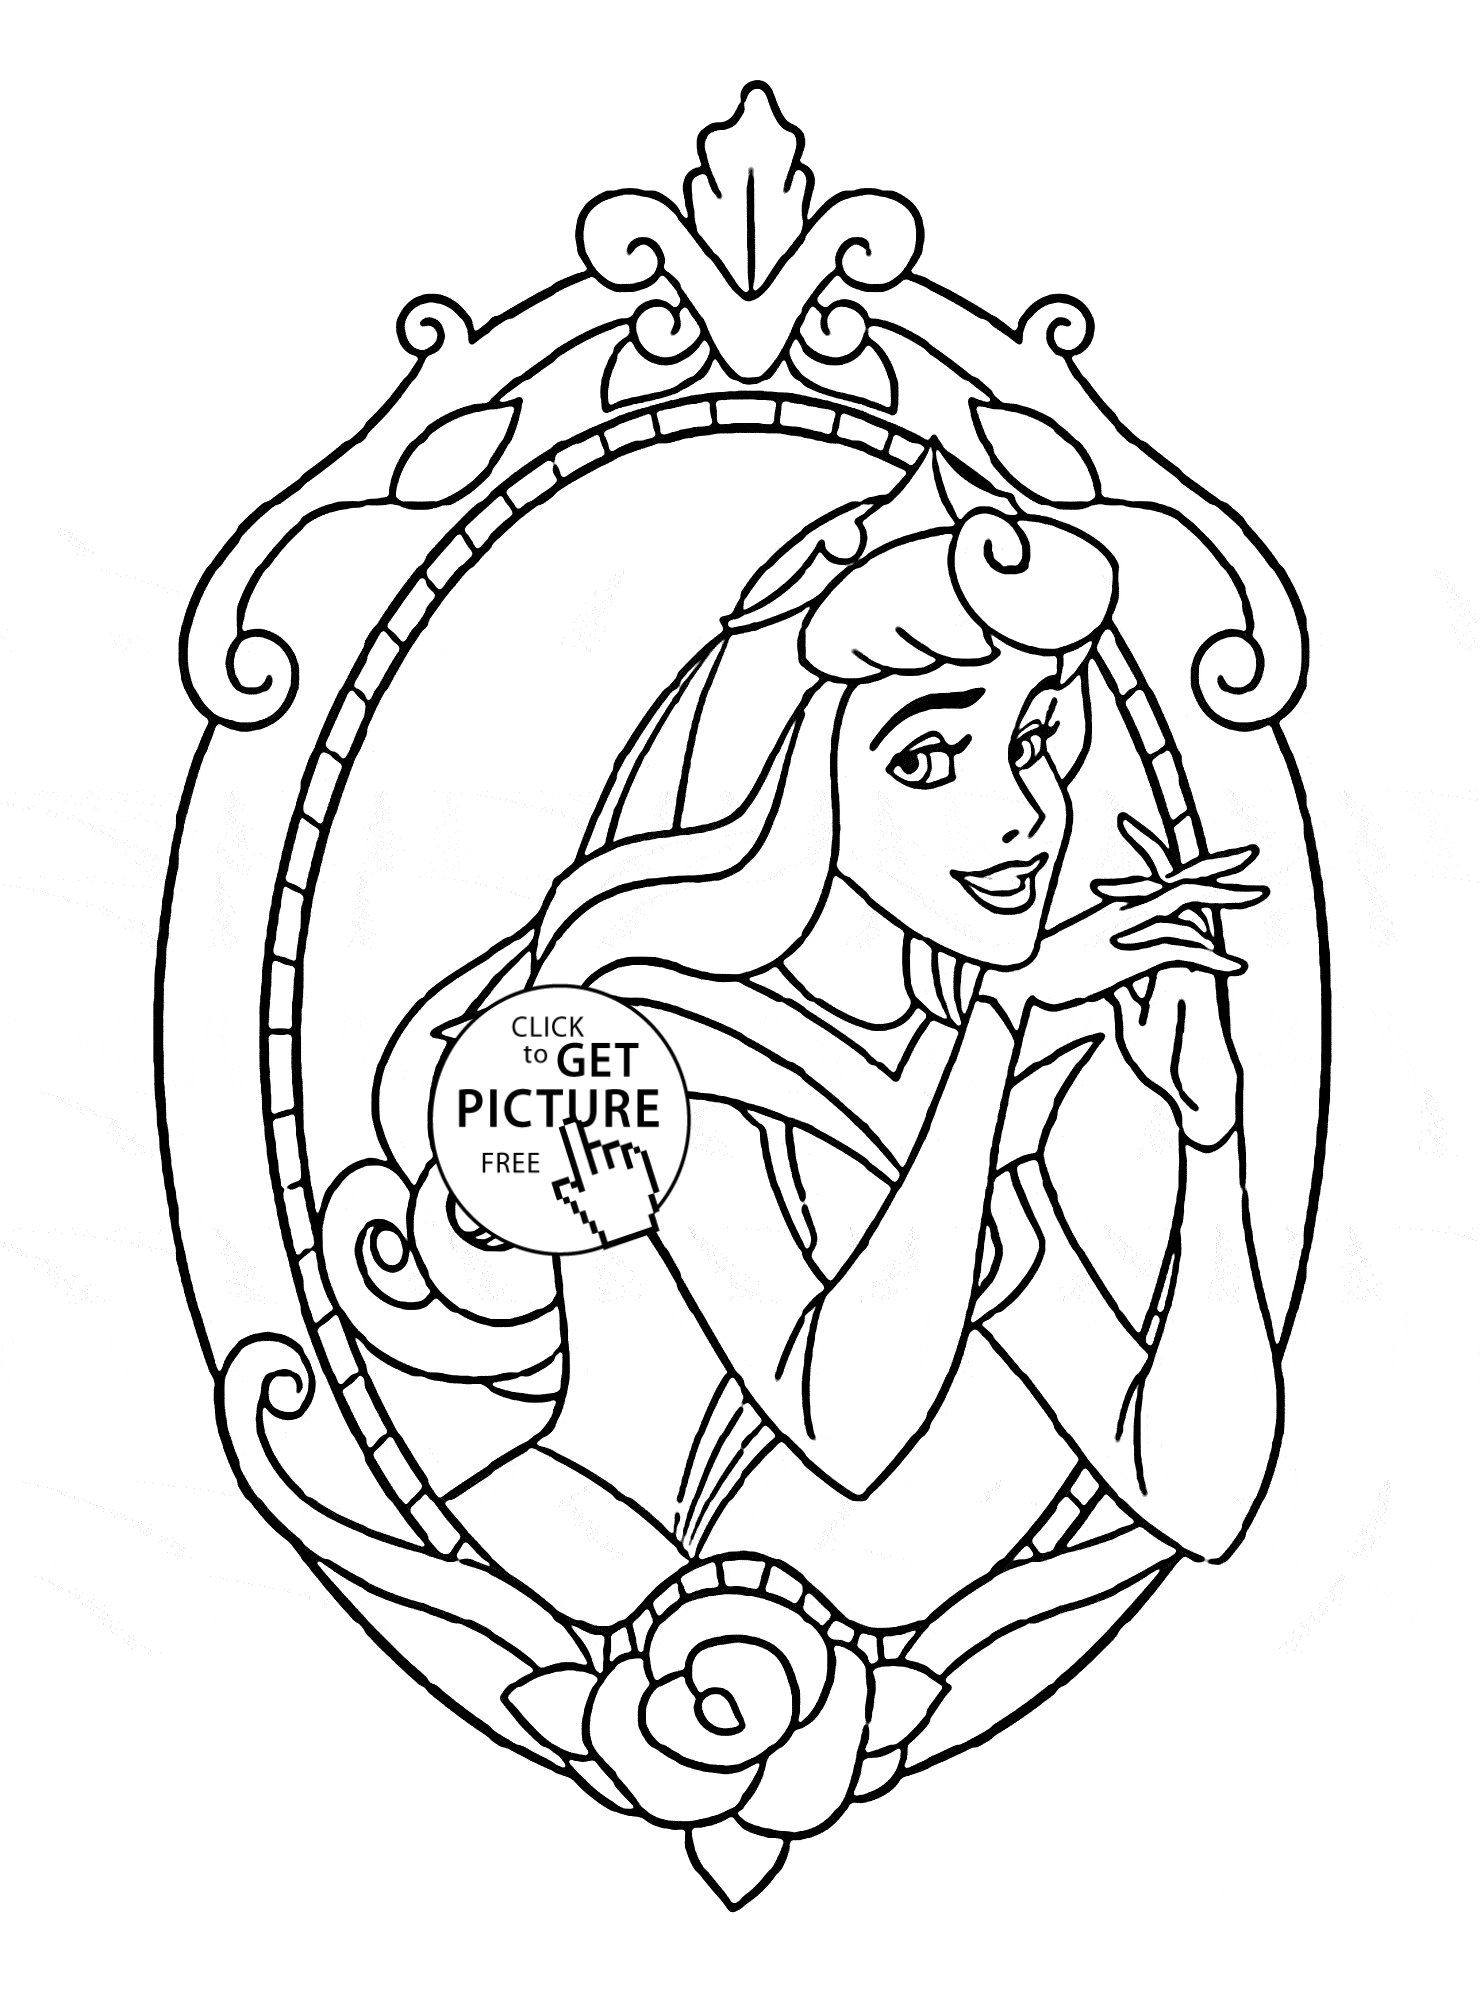 Princess Aurora Coloring Pages Free Coloring Pages Disney Princess Aurora Coloring Page For Kids Pages